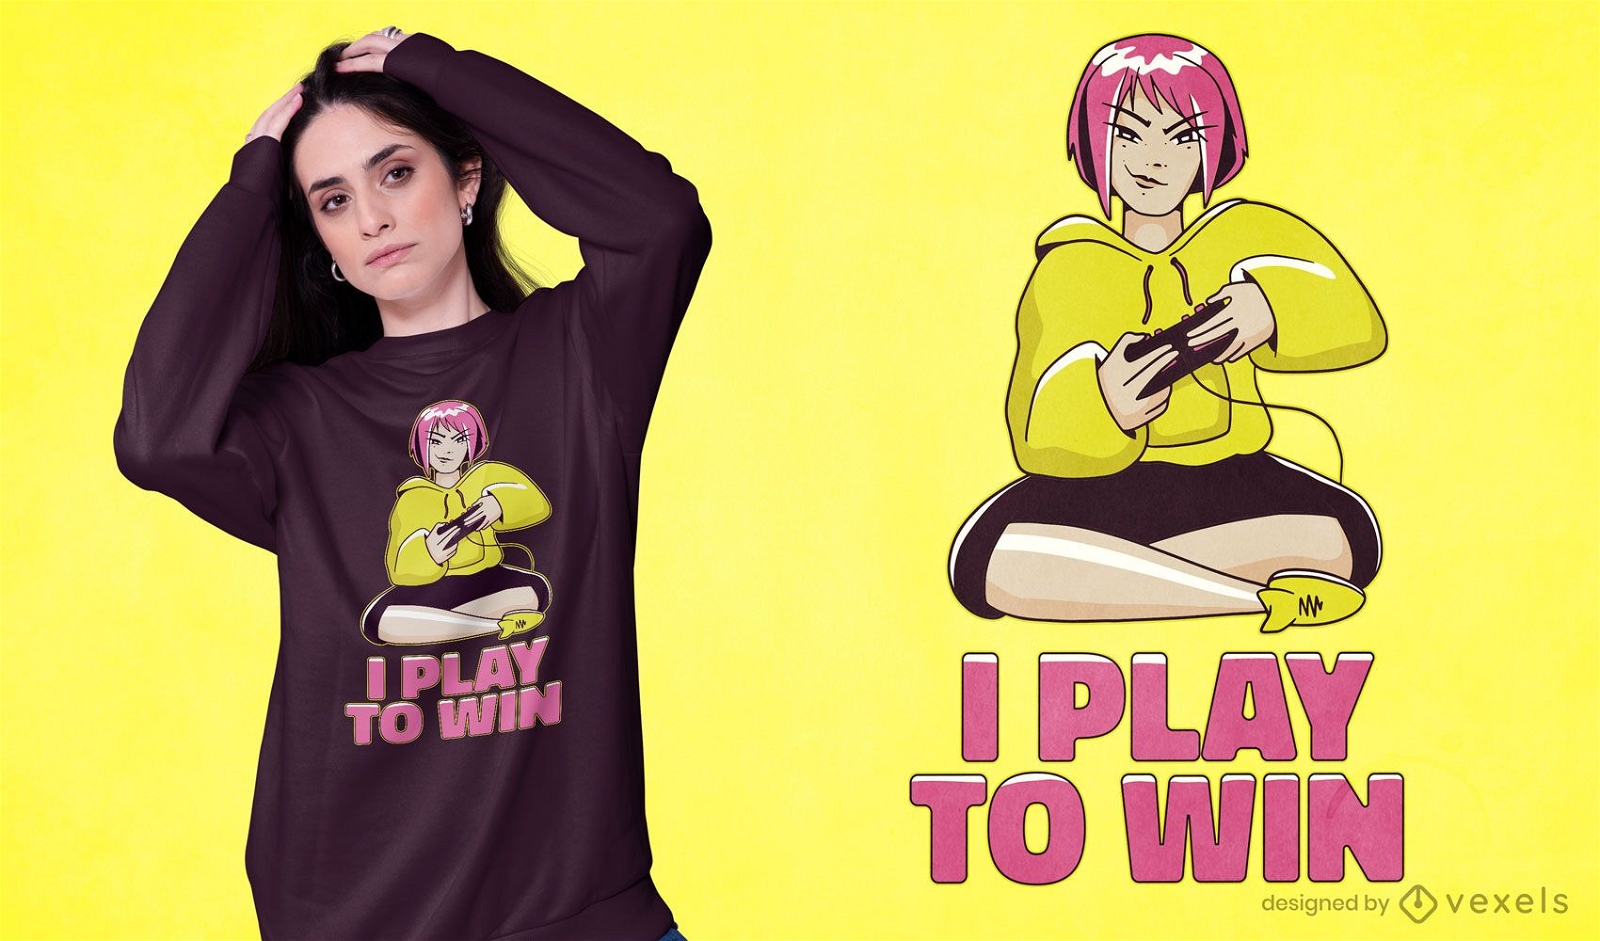 I play to win t-shirt design